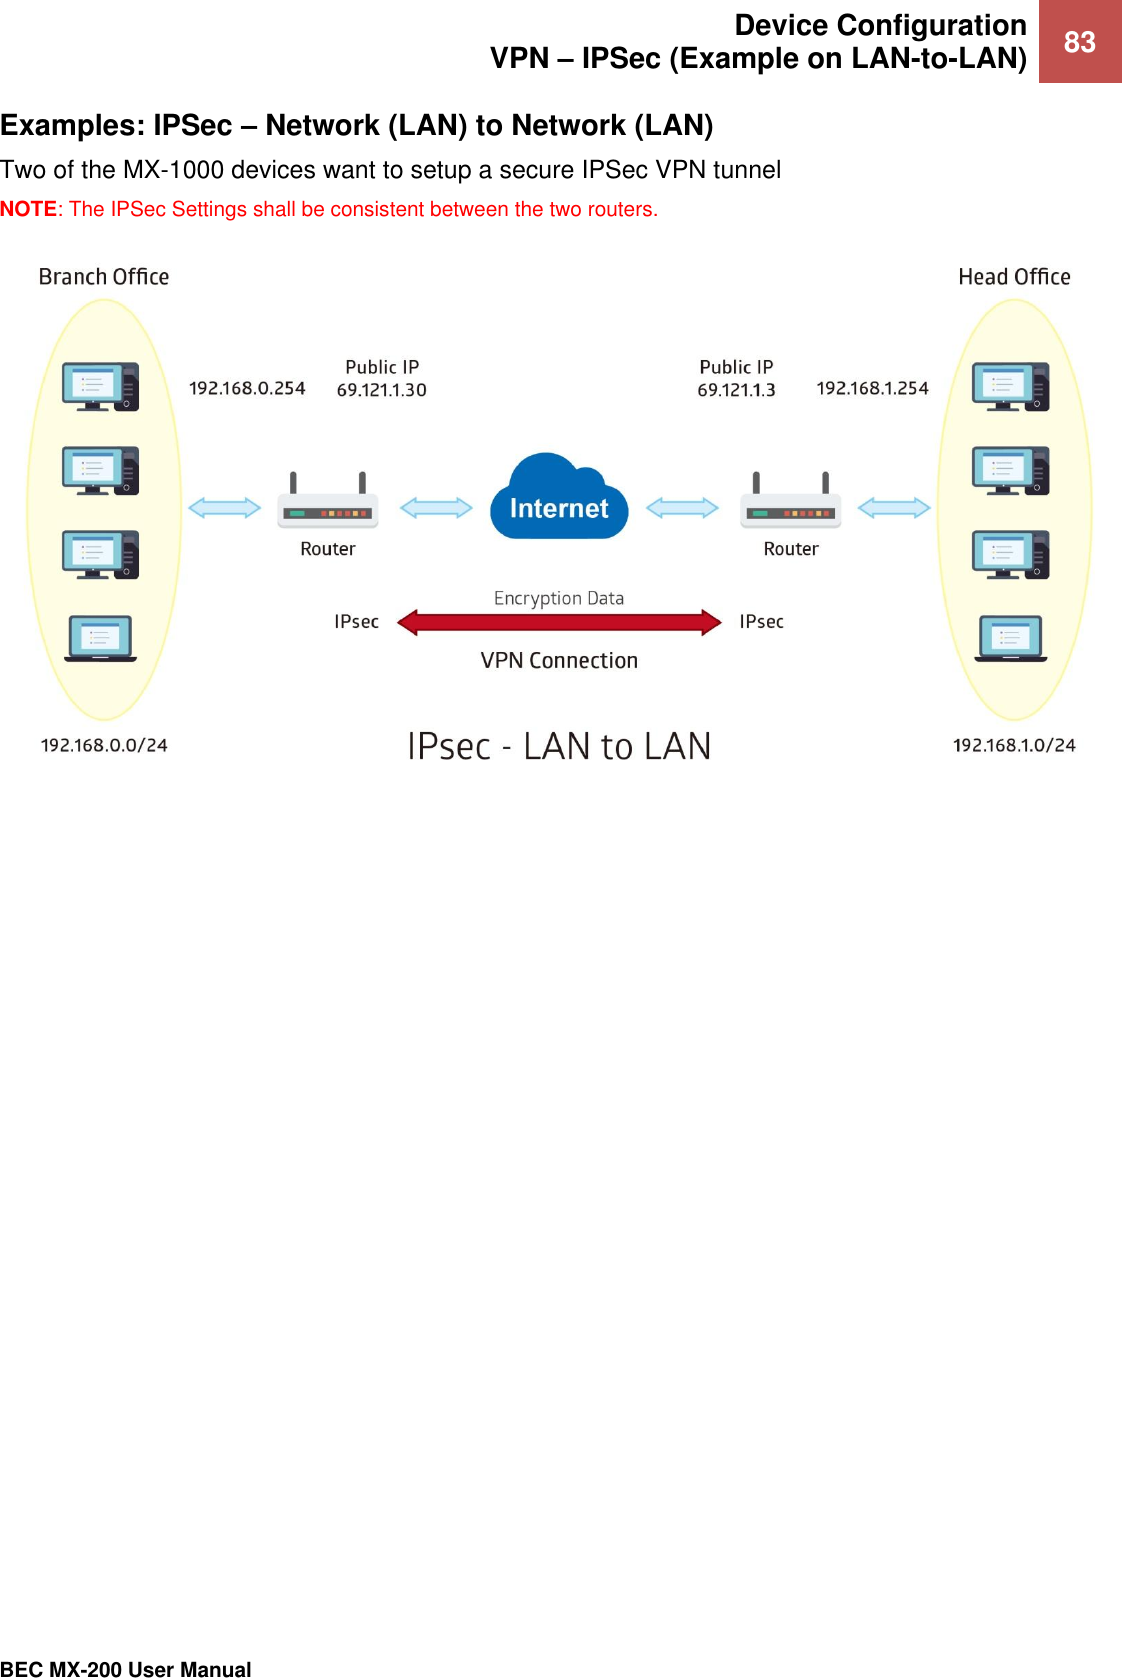  Device Configuration VPN – IPSec (Example on LAN-to-LAN) 83   BEC MX-200 User Manual  Examples: IPSec – Network (LAN) to Network (LAN) Two of the MX-1000 devices want to setup a secure IPSec VPN tunnel NOTE: The IPSec Settings shall be consistent between the two routers.       